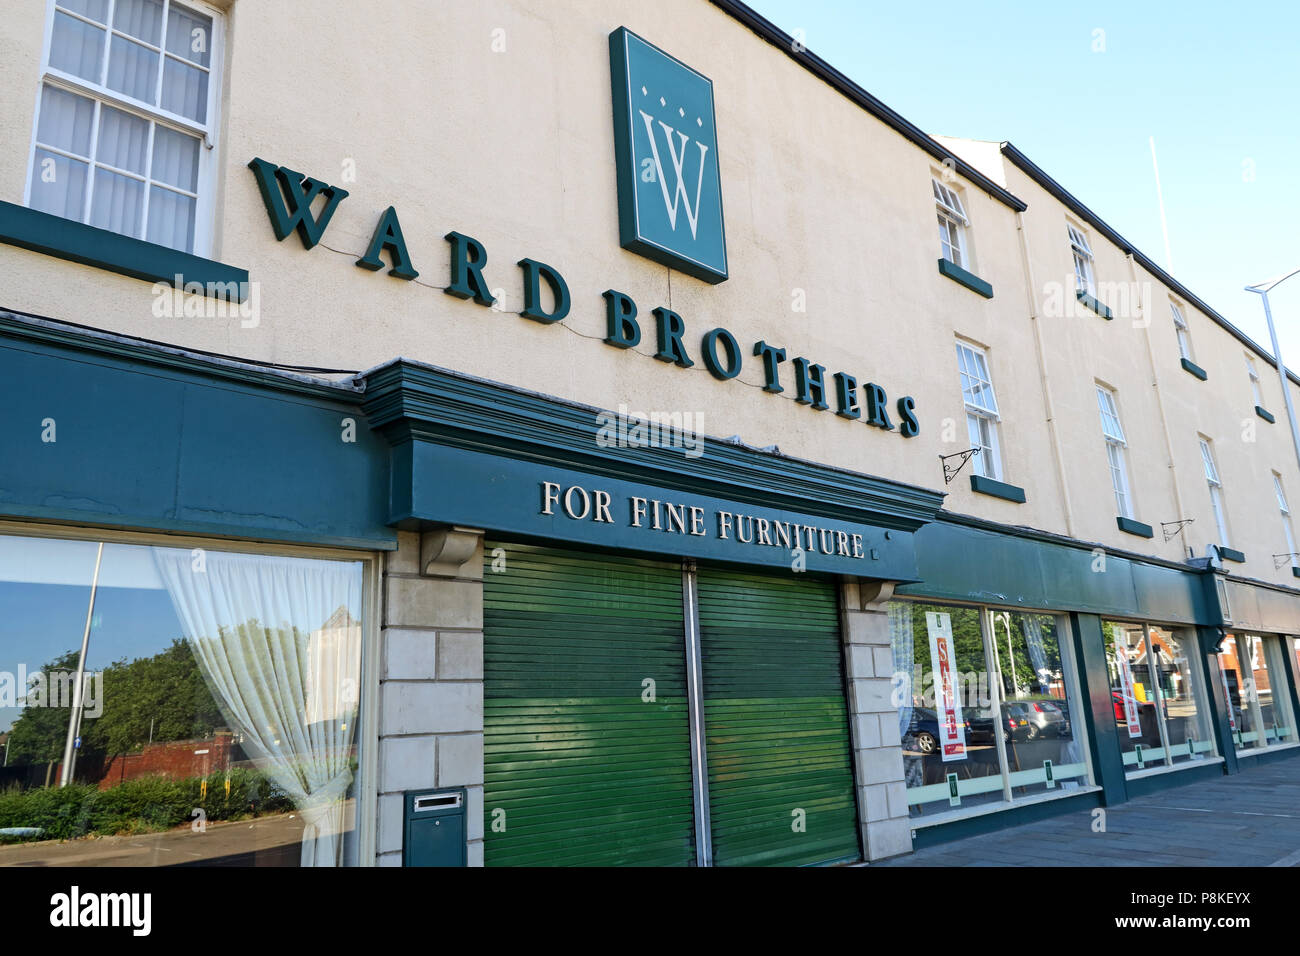 Ward Brothers Magasin de meubles, Doncaster, 29 - 40 Waterdale, Doncaster, Yorkshire, Angleterre, Royaume-Uni, DN1 3EY Banque D'Images